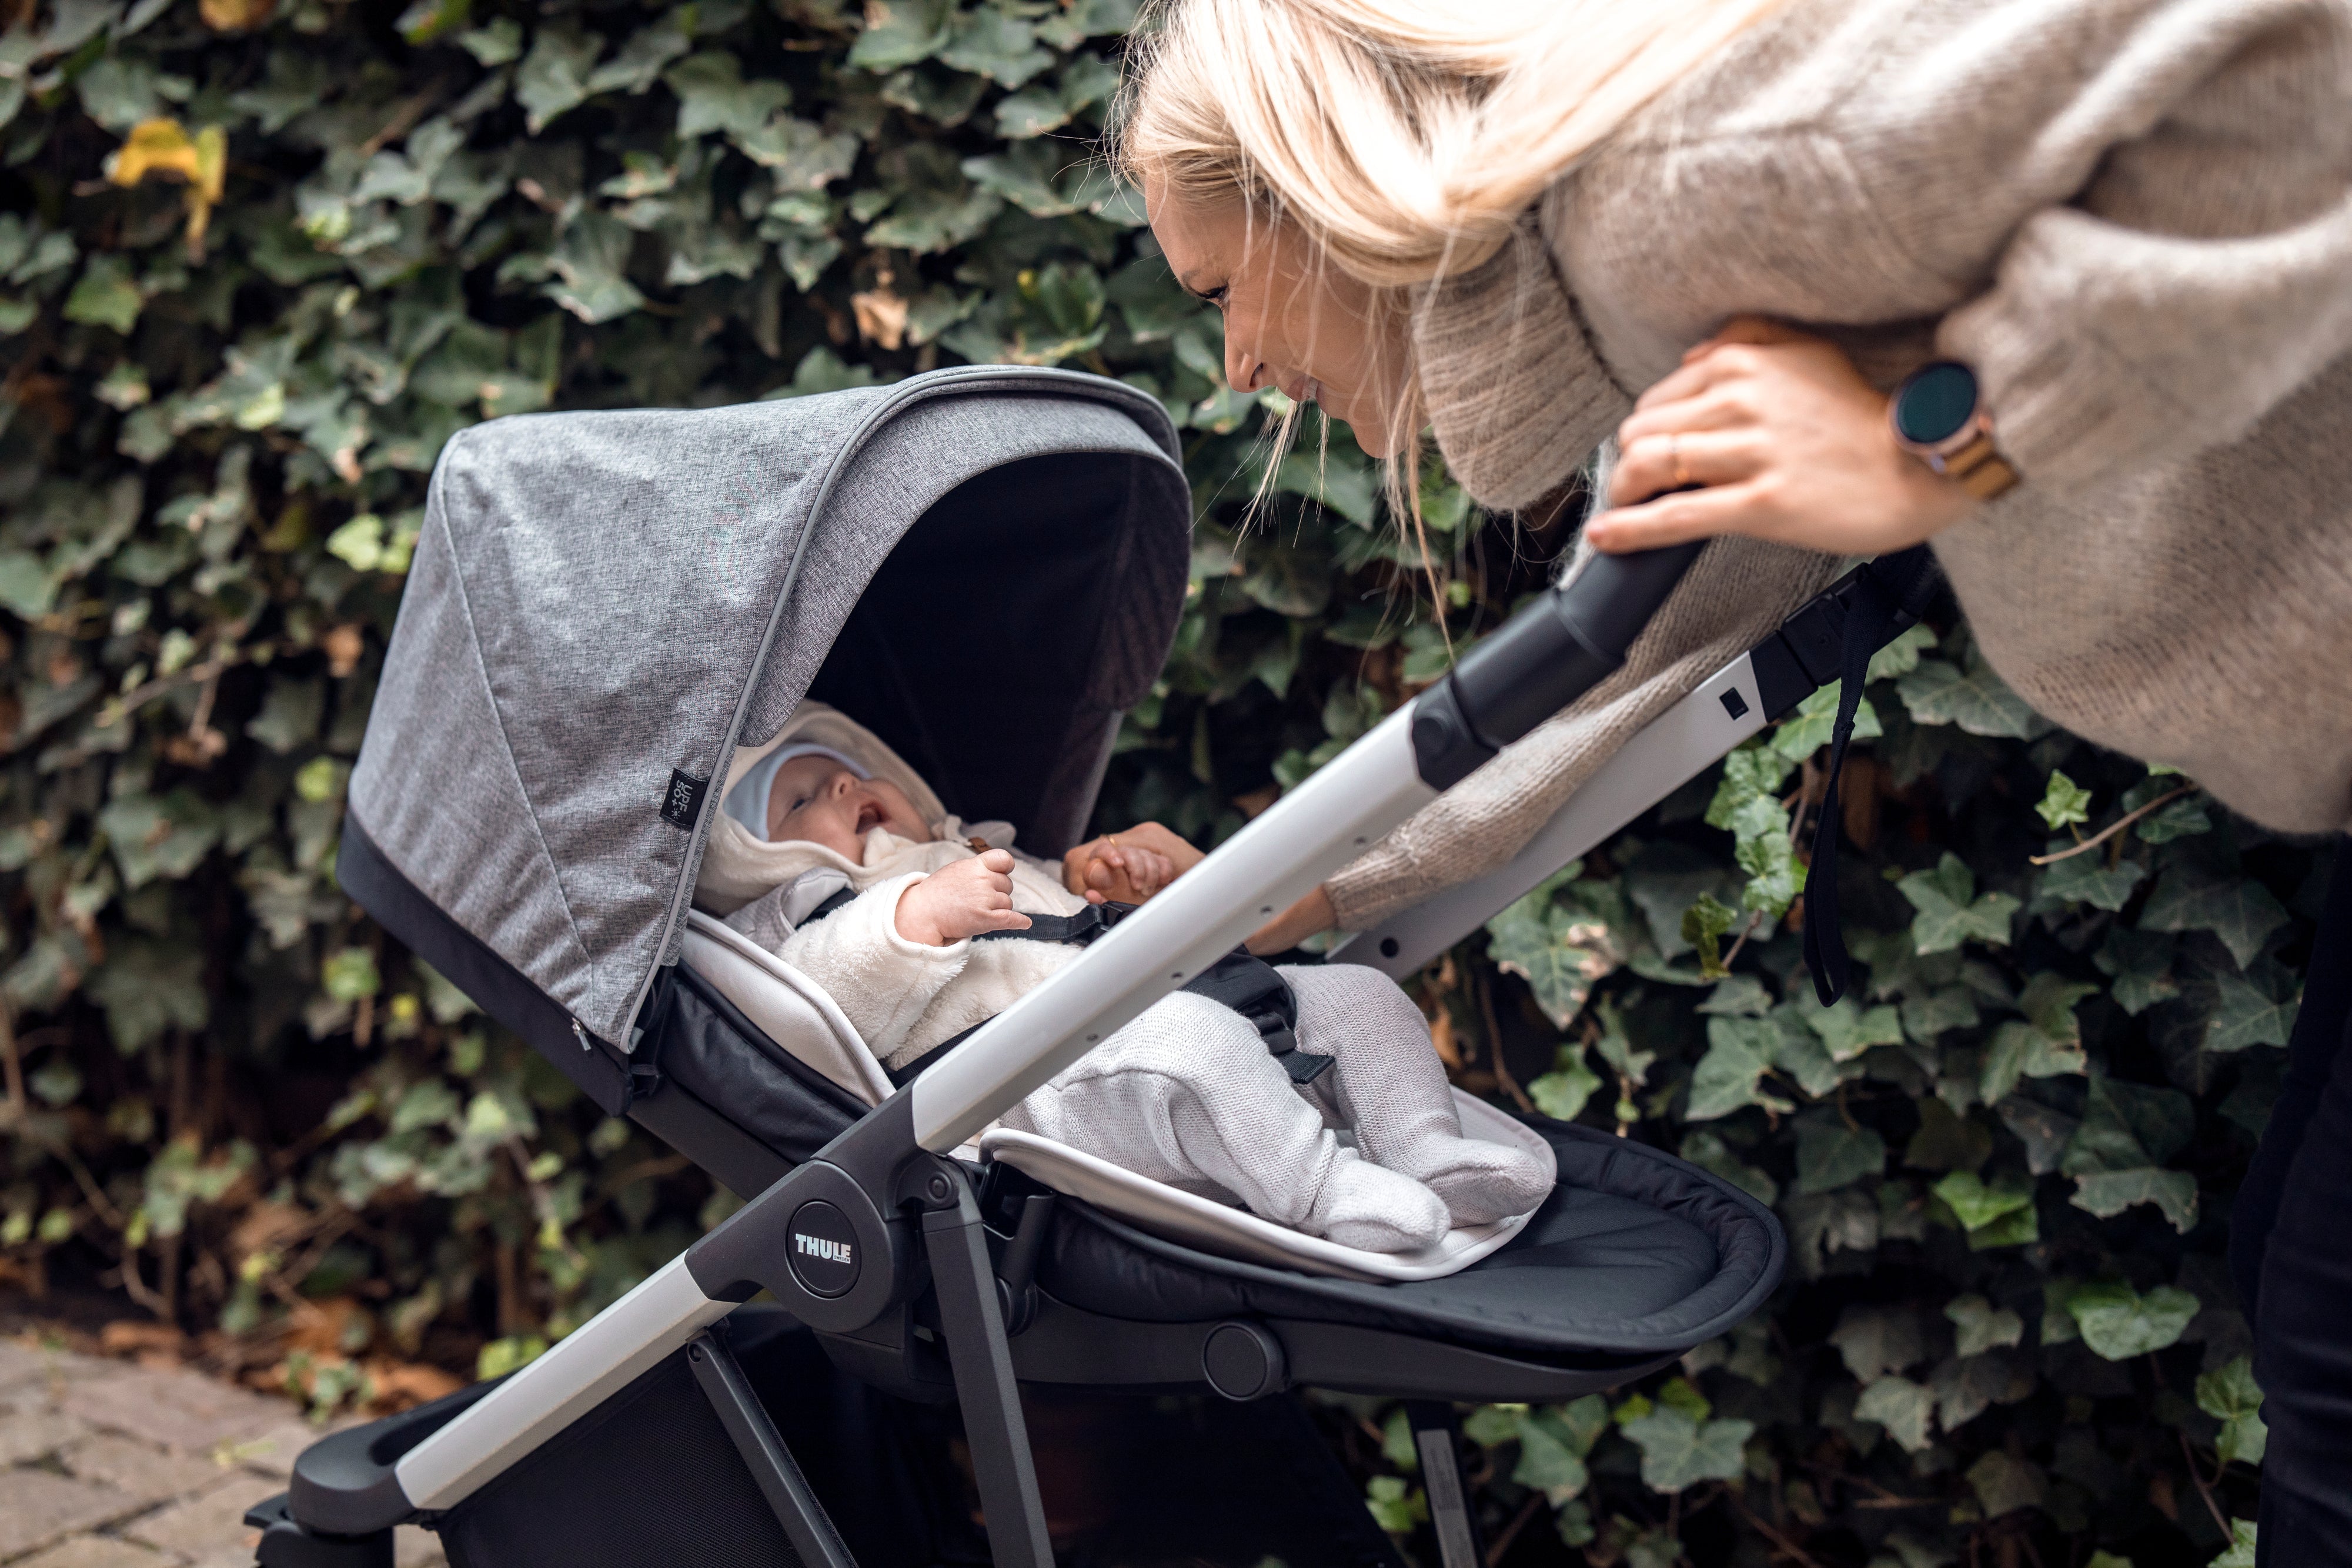 Mum playing with baby in Thule Shine Reversible & Compact City Stroller Grey Melange with Newborn Inlay